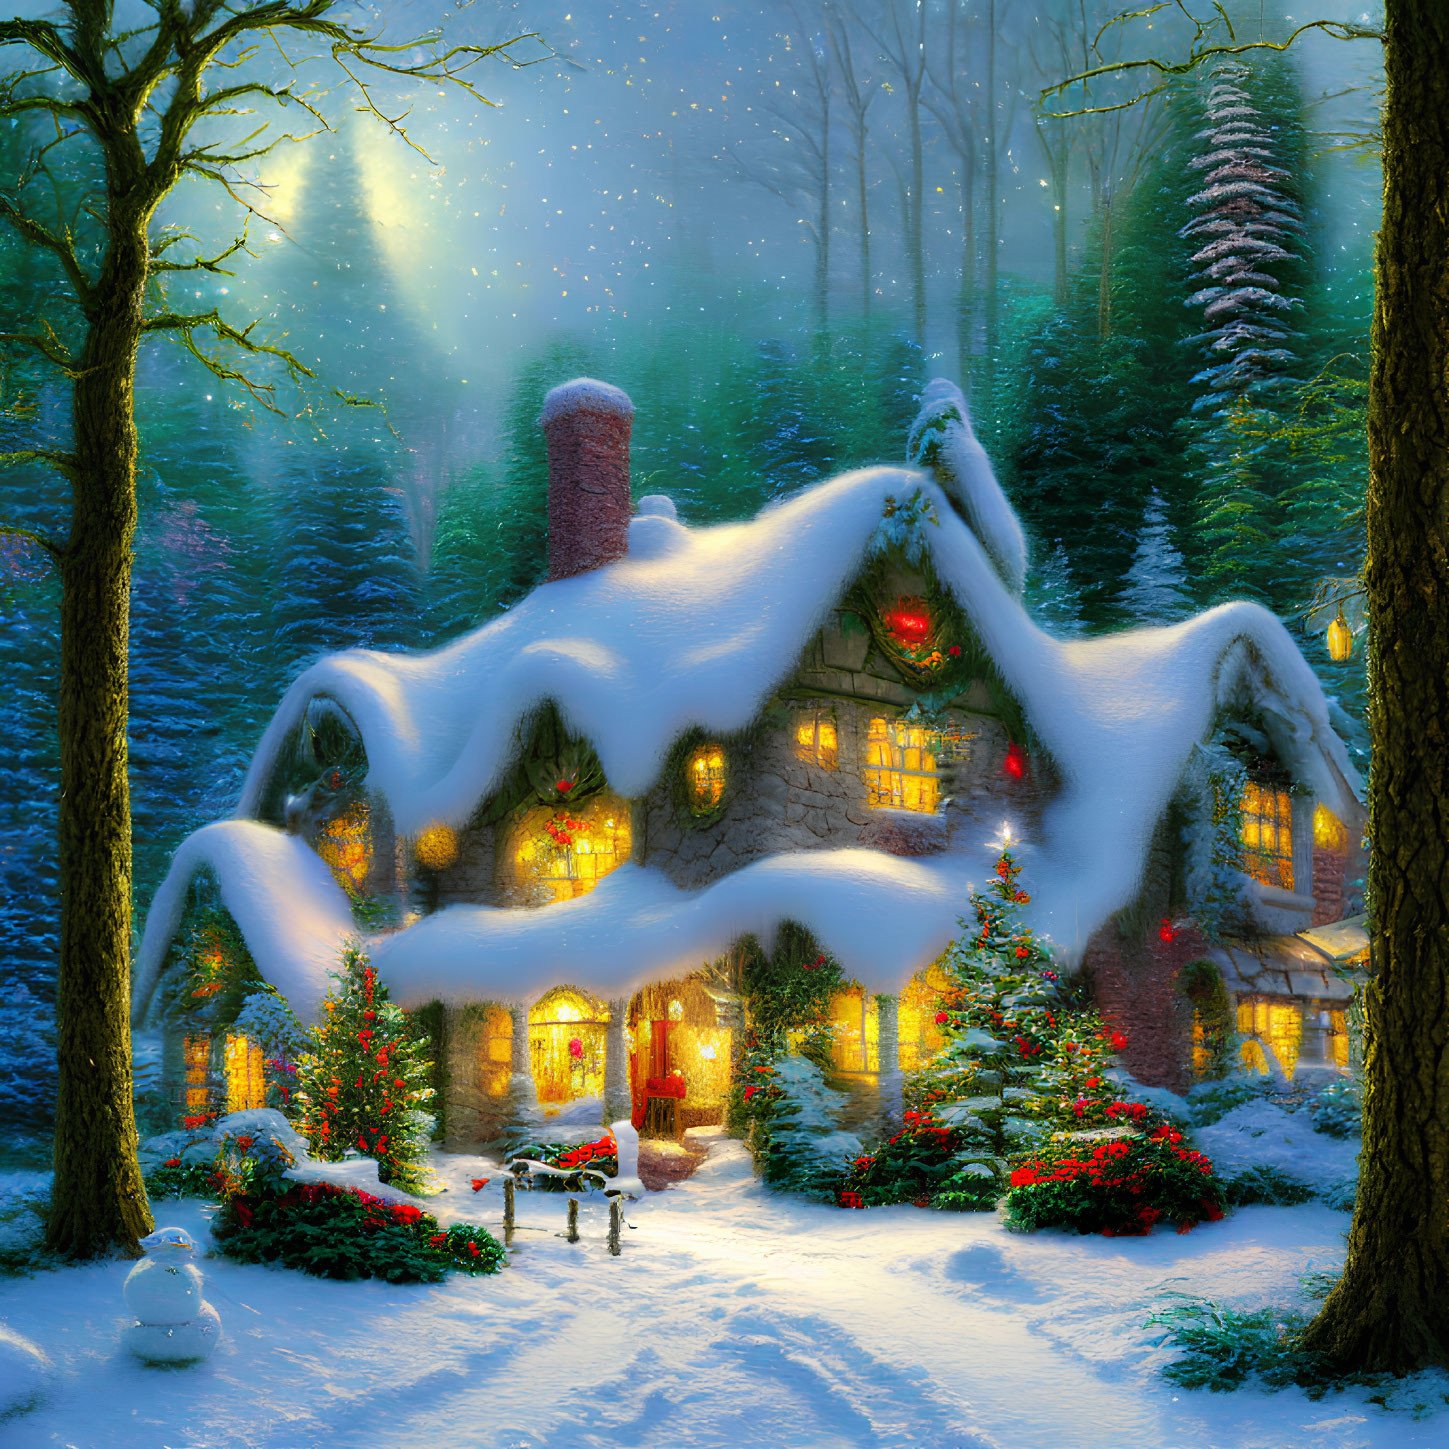 Snow-covered Christmas cottage in enchanted winter forest at twilight